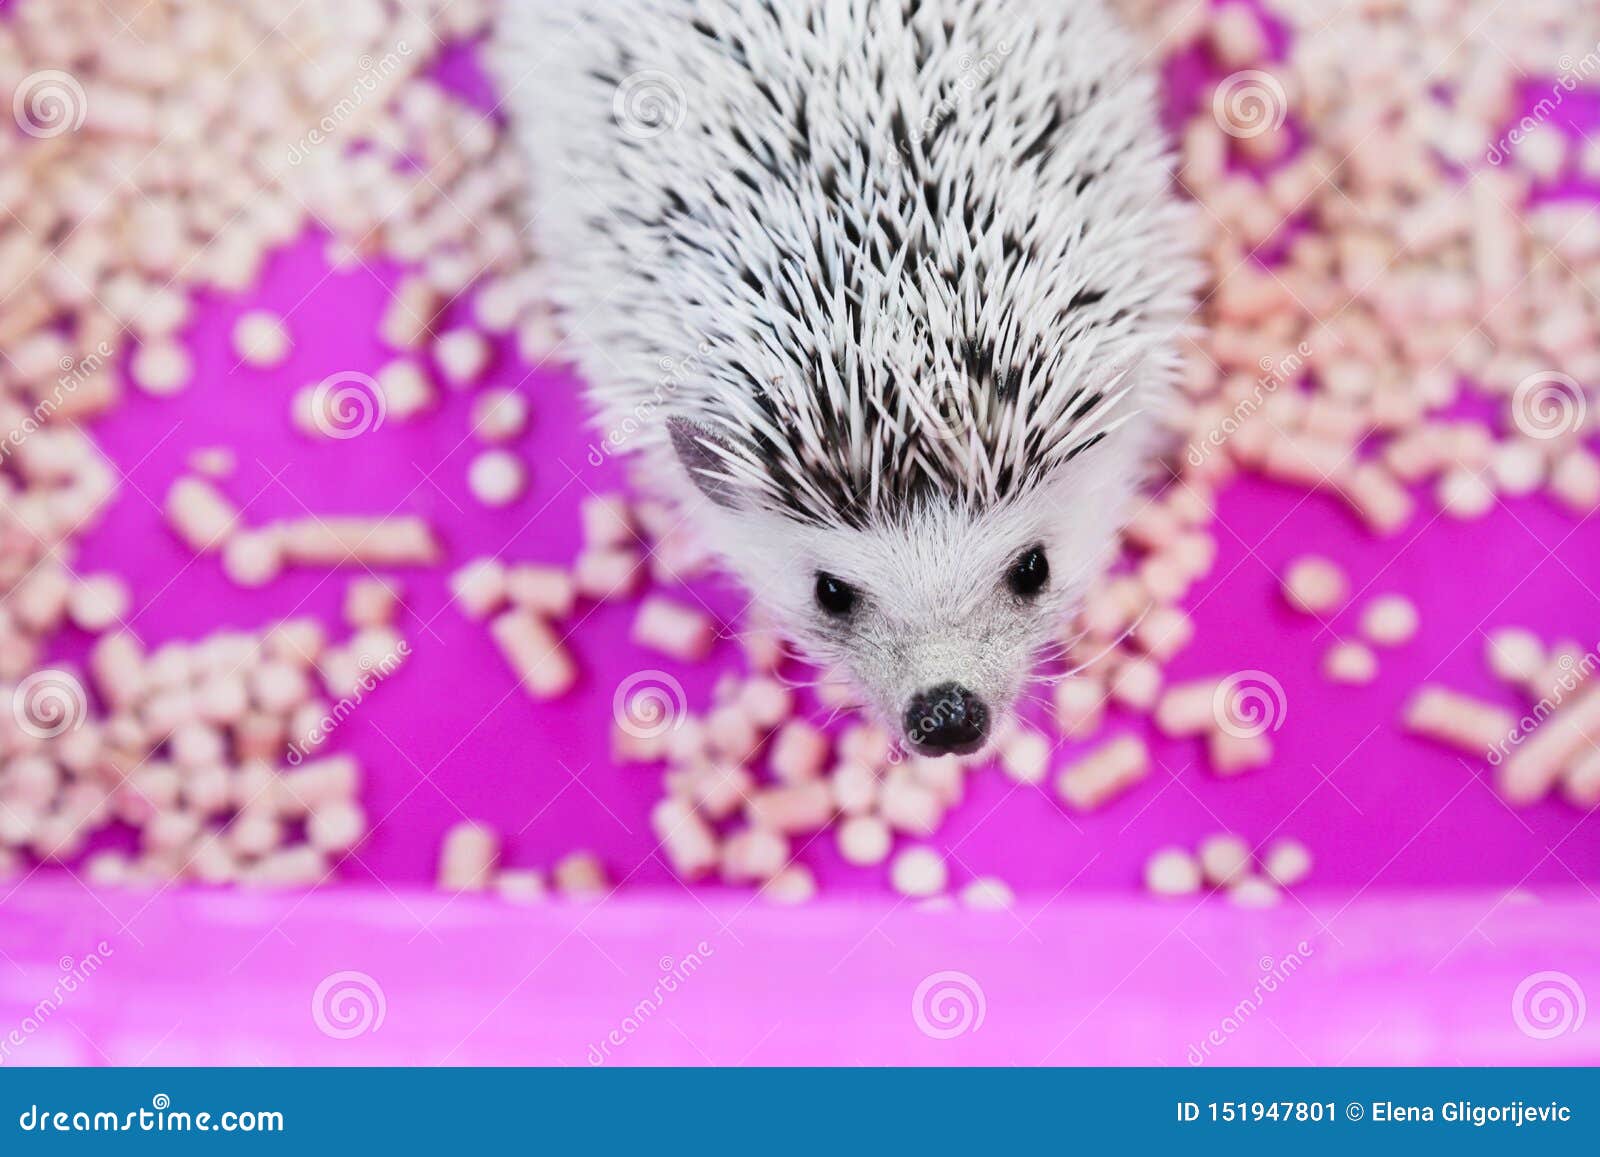 Pet African Pygmy Hedgehog In Box With Wood Granules Care Of A Hedgehog Stock Image Image Of Needle Atelerix 151947801,Fried Chicken Recipe Kfc